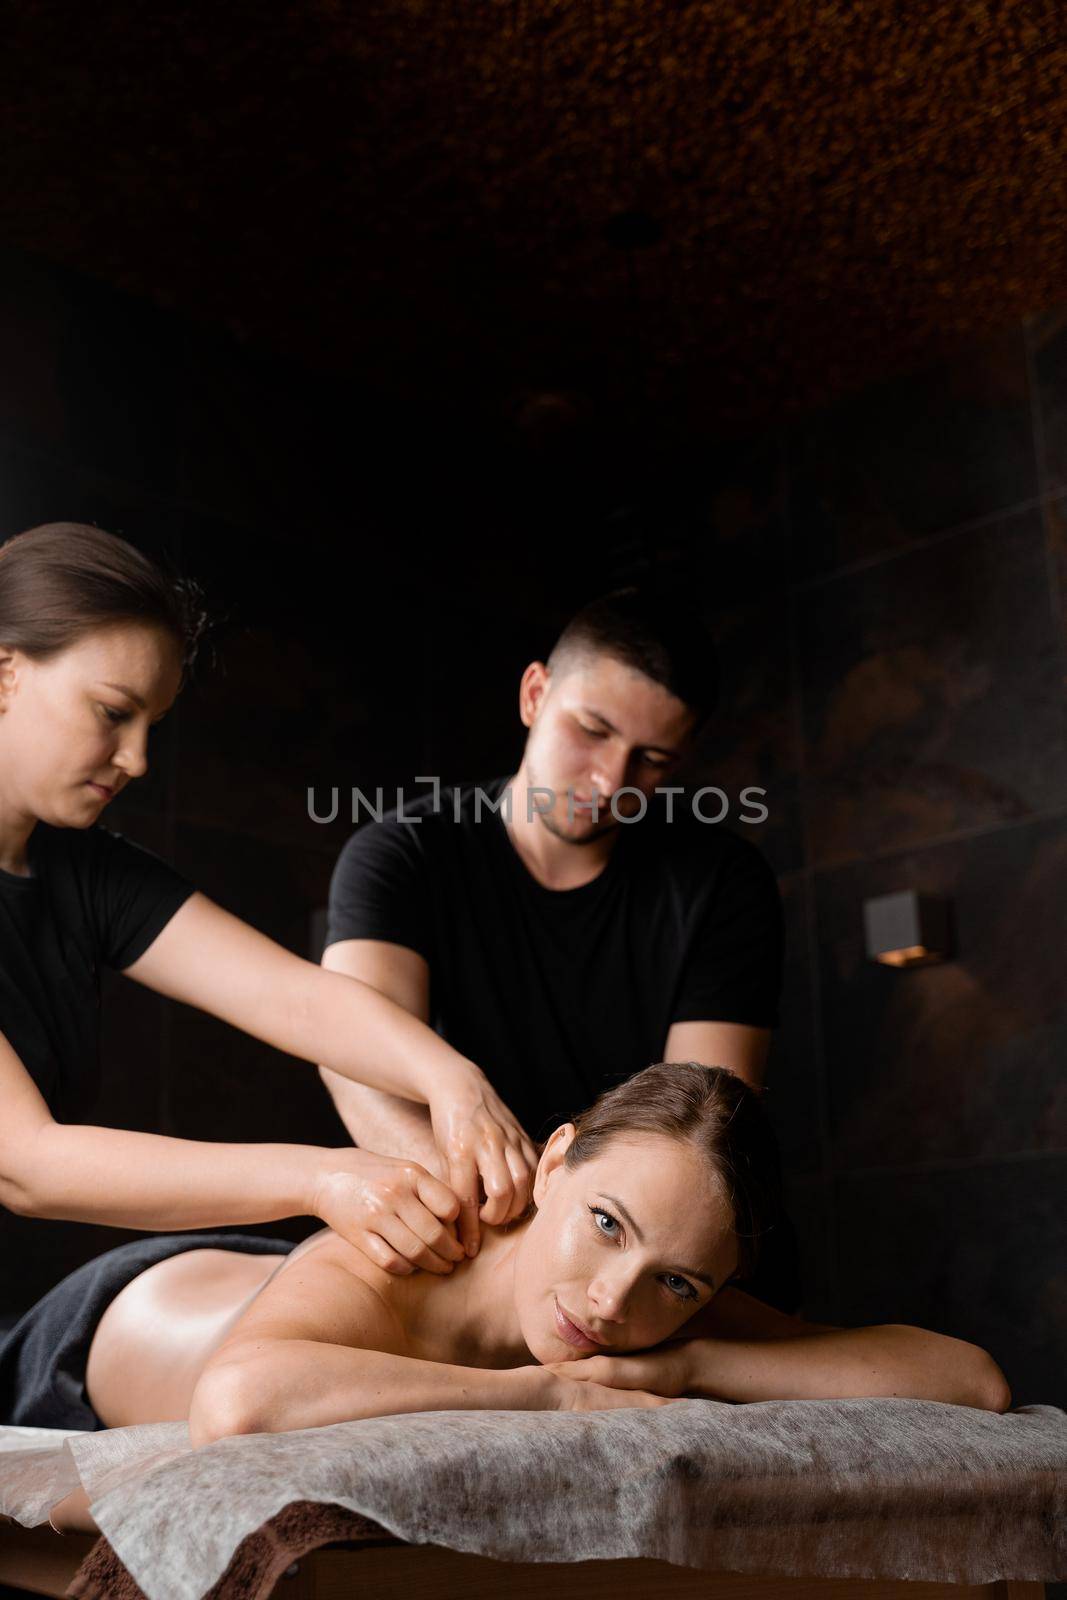 4 hands massage in spa. Two masseurs are making four hands relaxing massage with oil for girl. Relaxation. Manual therapy.